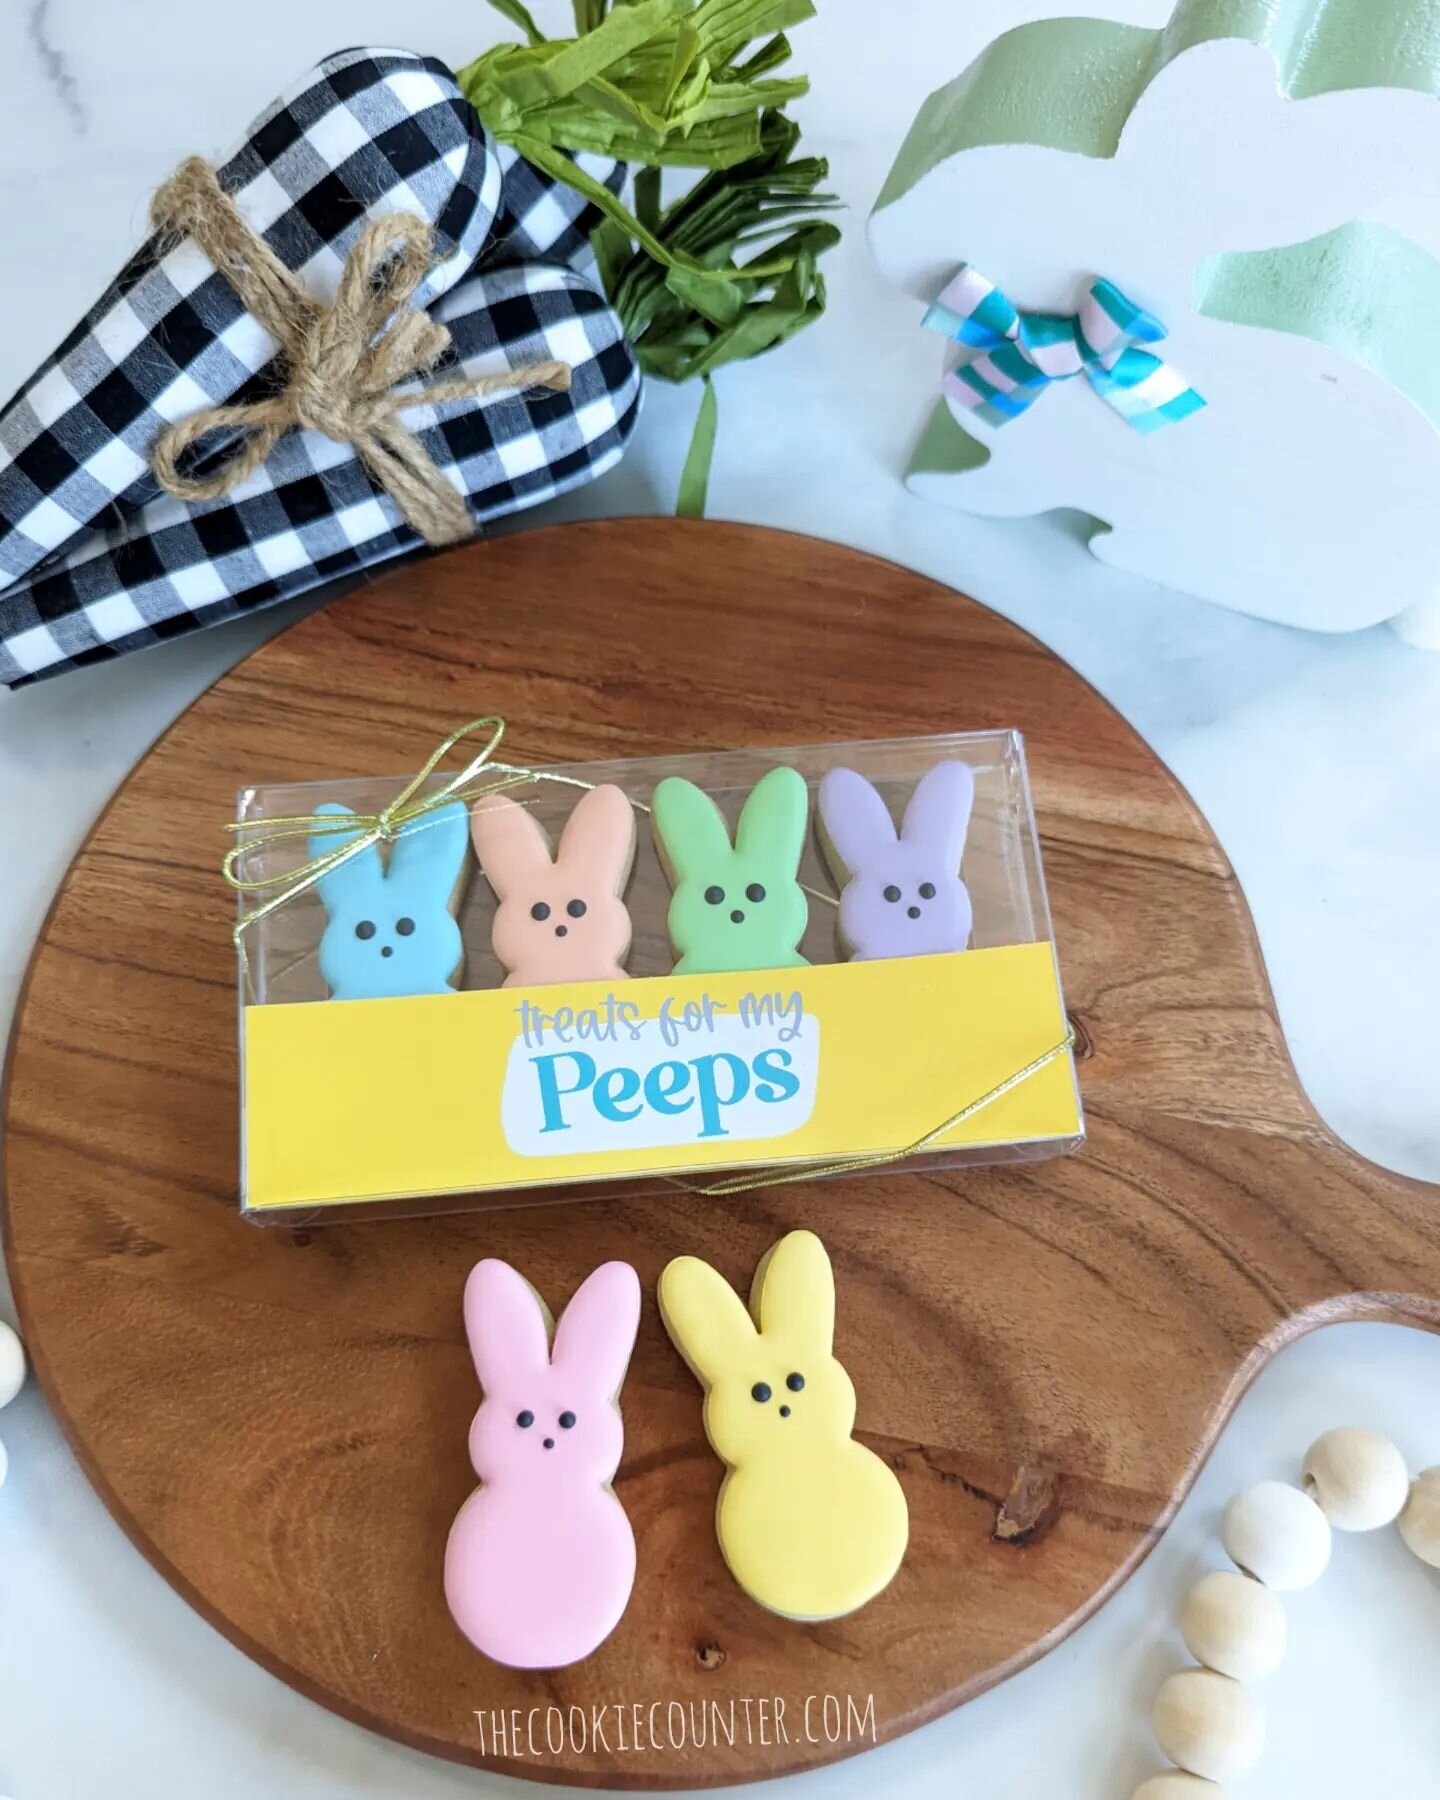 Make sure you snag some treats for your peeps 🐰🐰 Link to order in bio